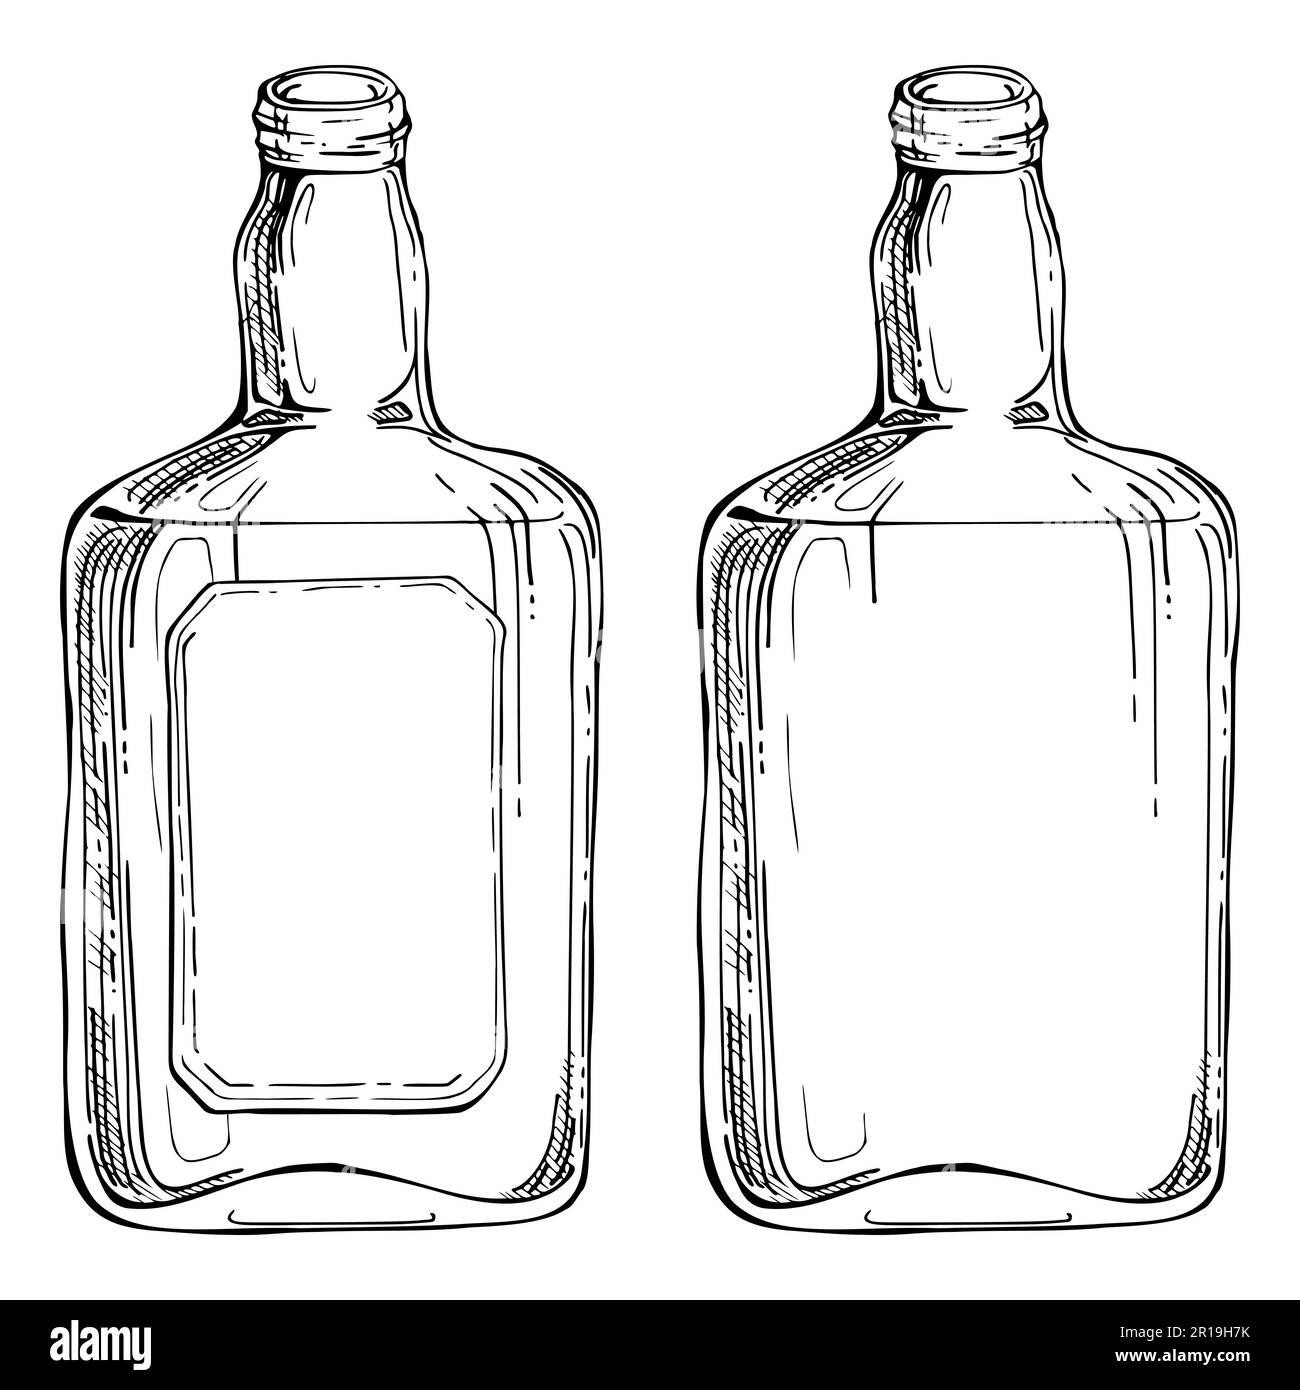 Ink hand drawn vector sketch of isolated object. Scotch whisky whiskey glass square bottle with label. Scottish symbol drink. Design for tourism Stock Vector